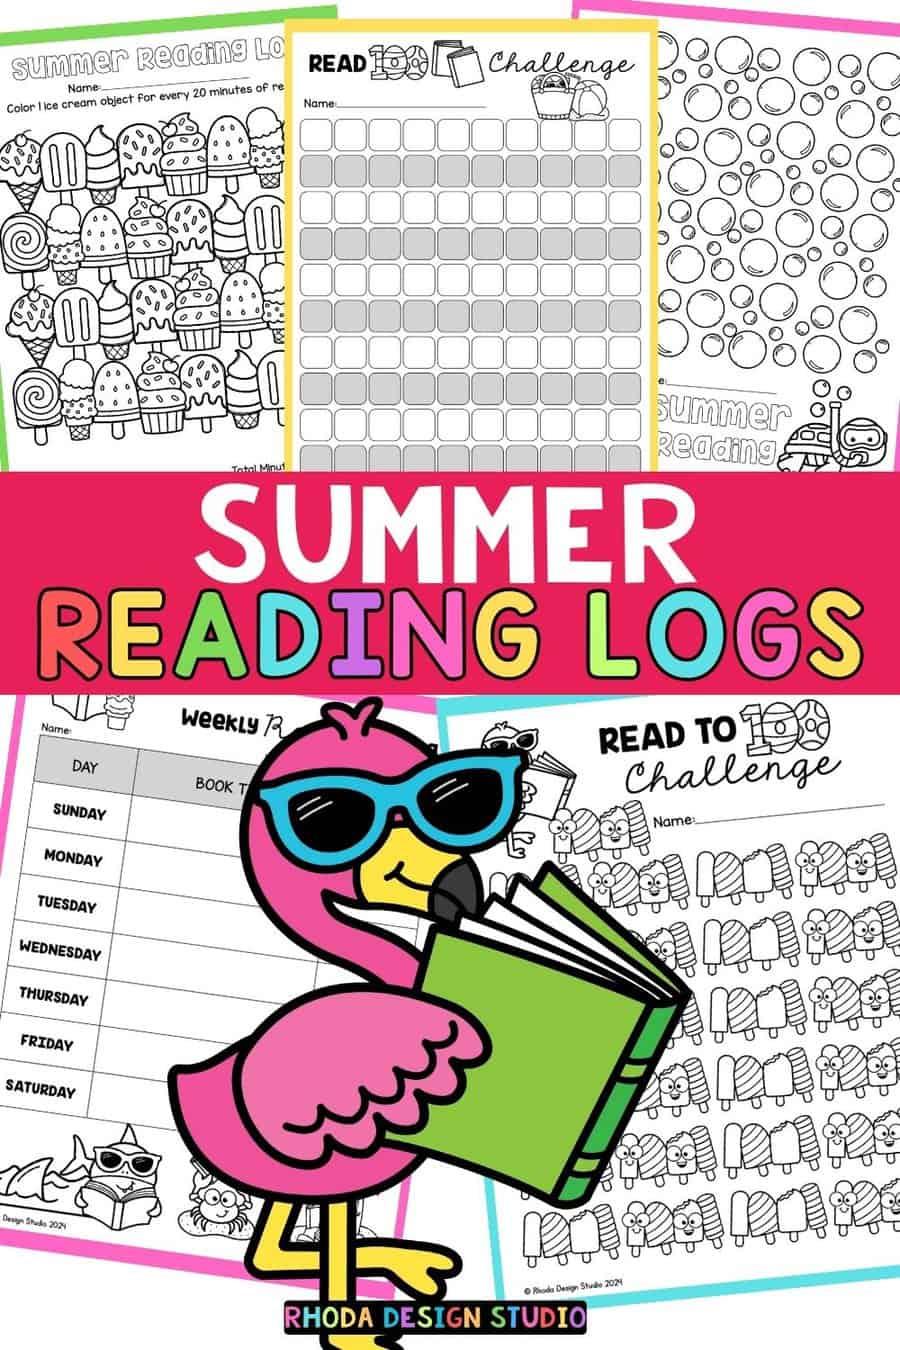 Help your kids unlock a world of imagination this summer! Download our free summer reading log for kids and make reading a daily habit.